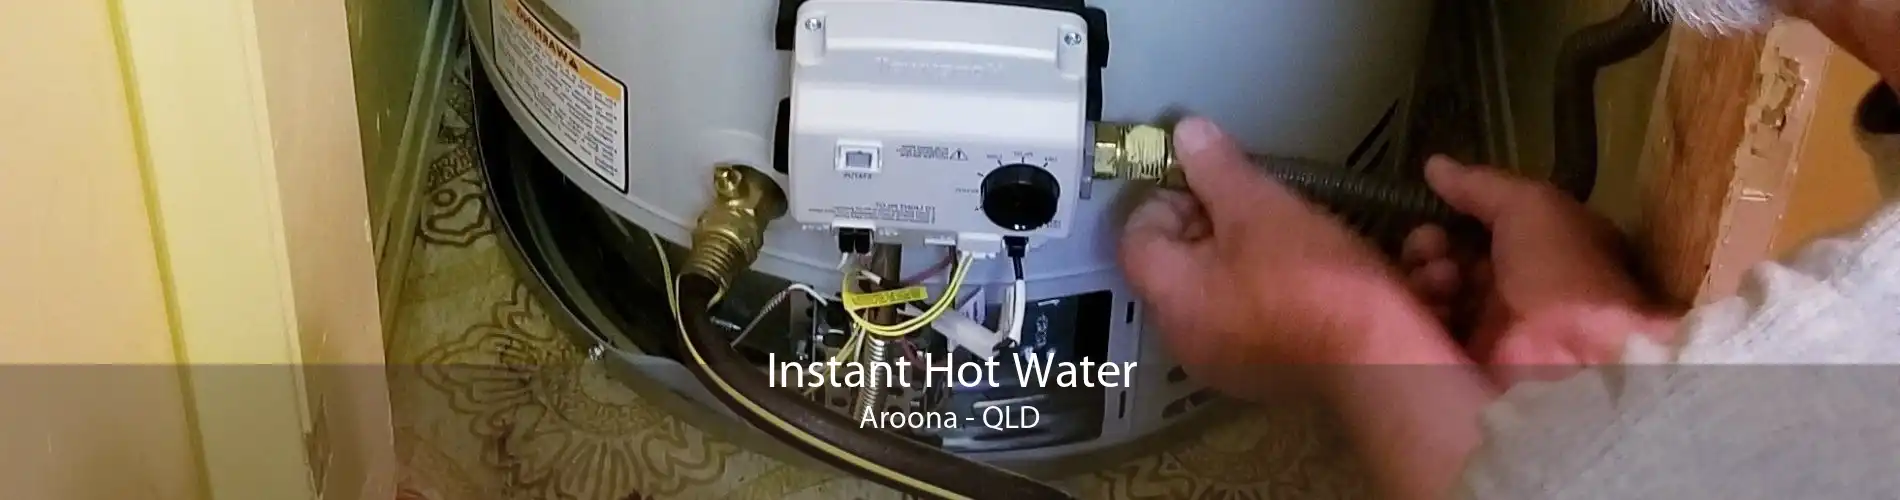 Instant Hot Water Aroona - QLD